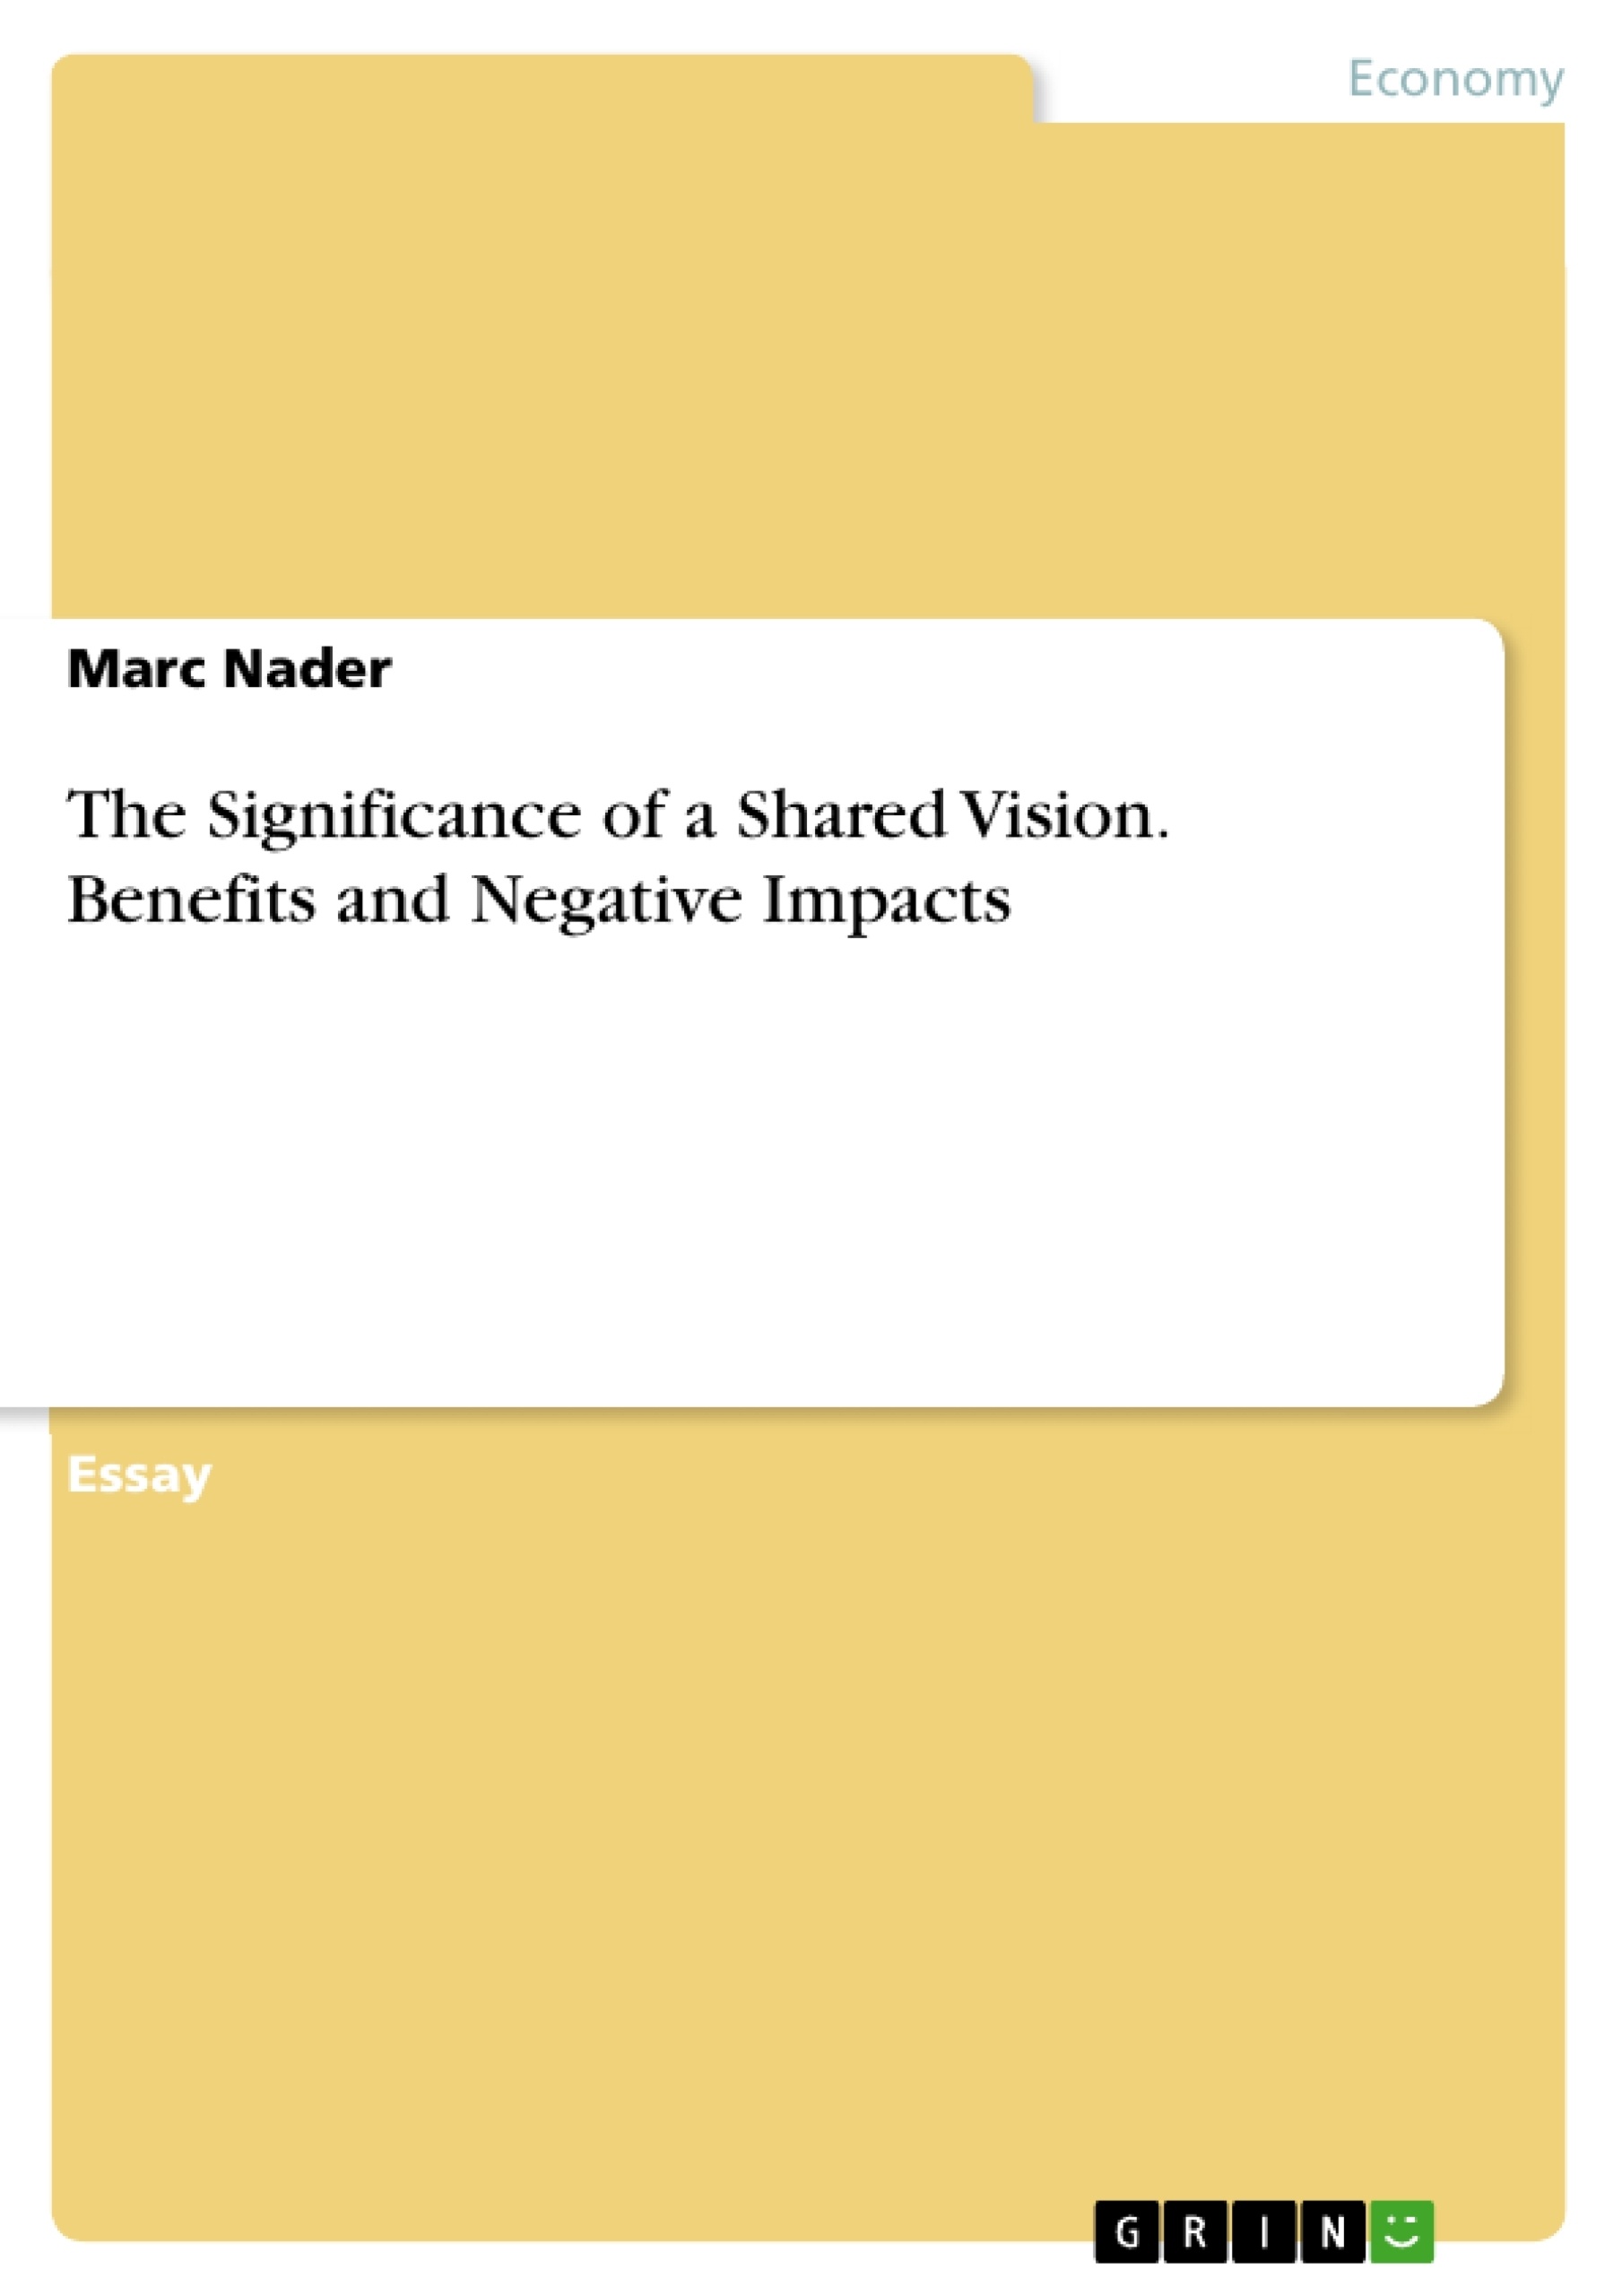 Title: The Significance of a Shared Vision. Benefits and Negative Impacts